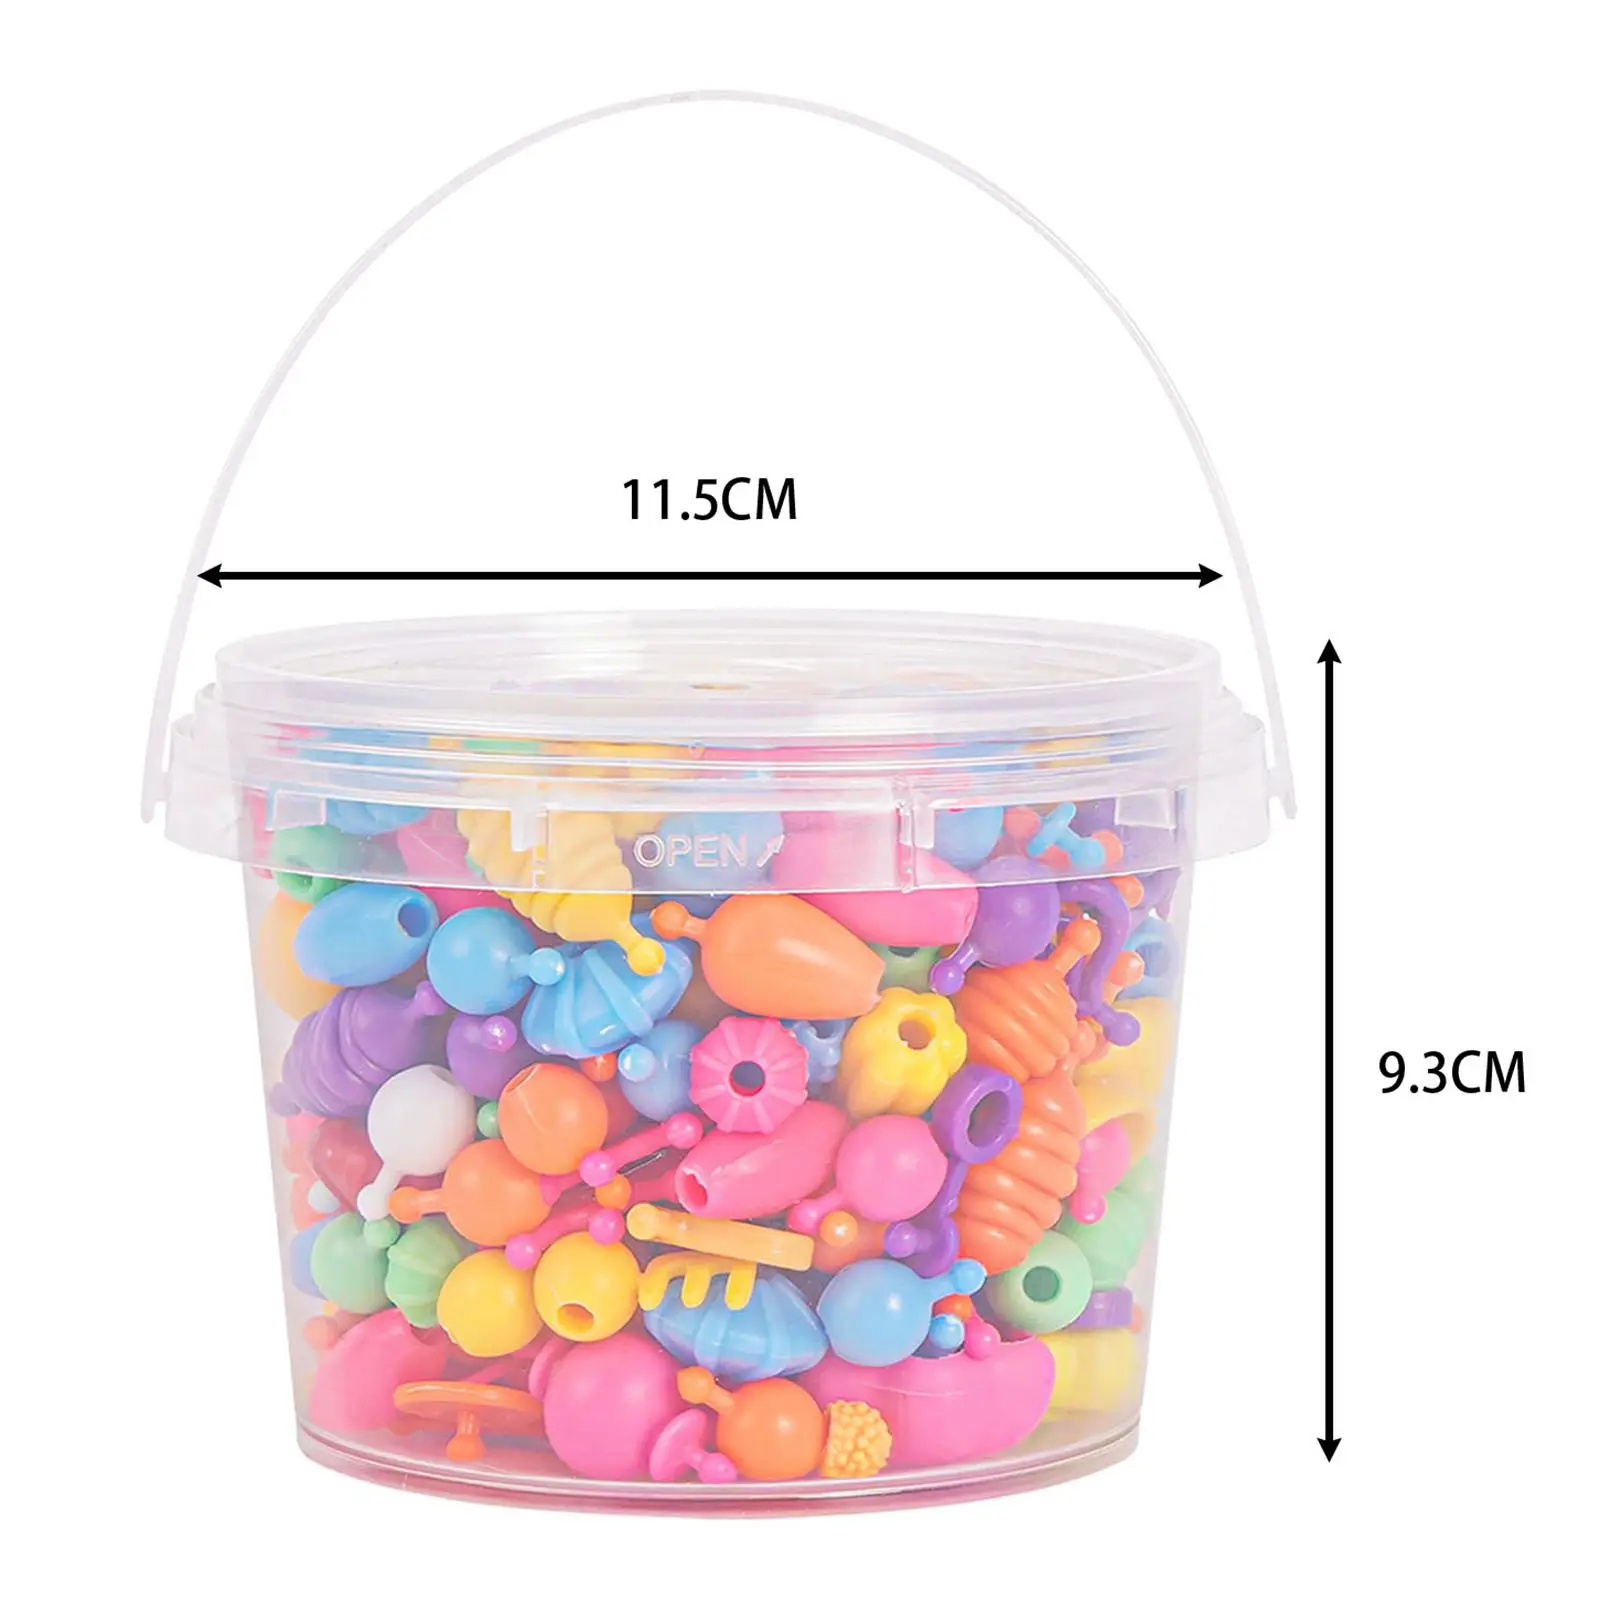 Beads Kids DIY Jewelry Making Kit Arts Jewelry Set Crafts Supplies Toys Snap Bead for Necklace Earrings Children Girls Gift